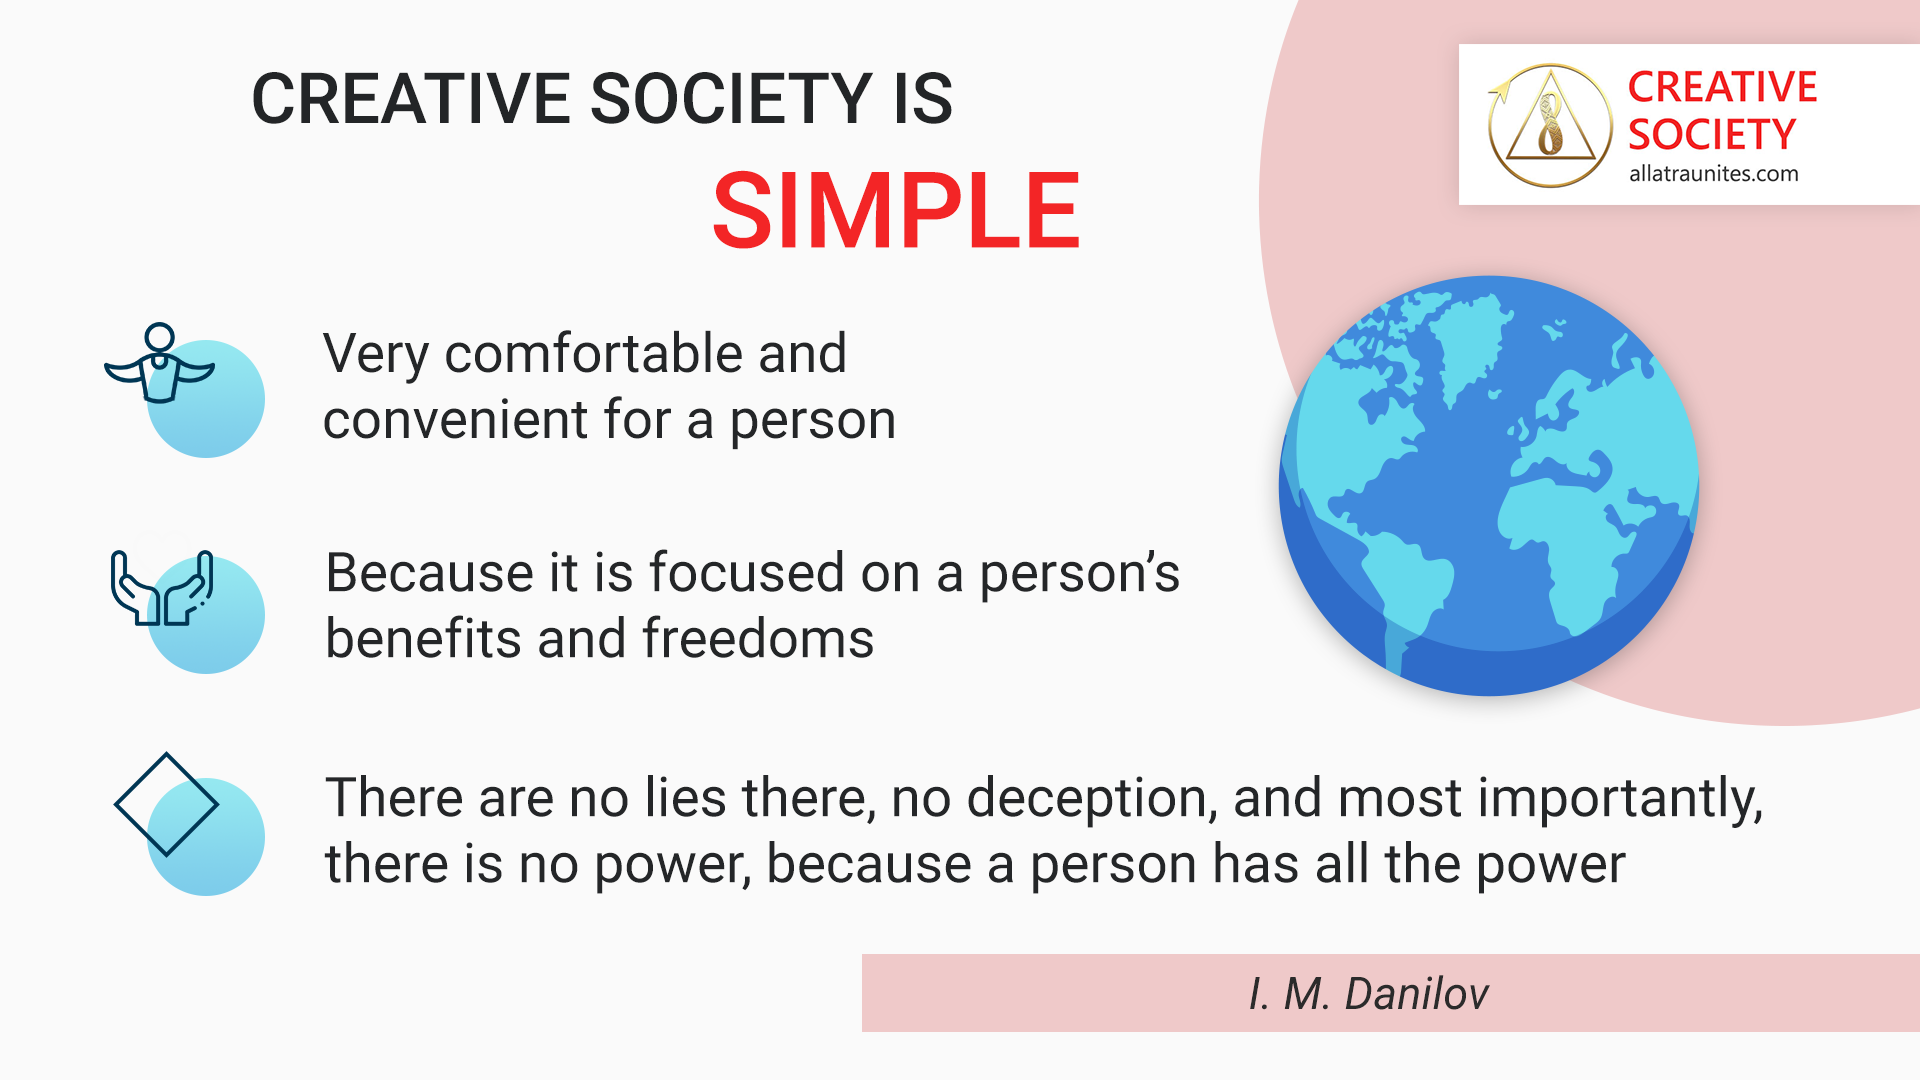 The Creative Society is simple